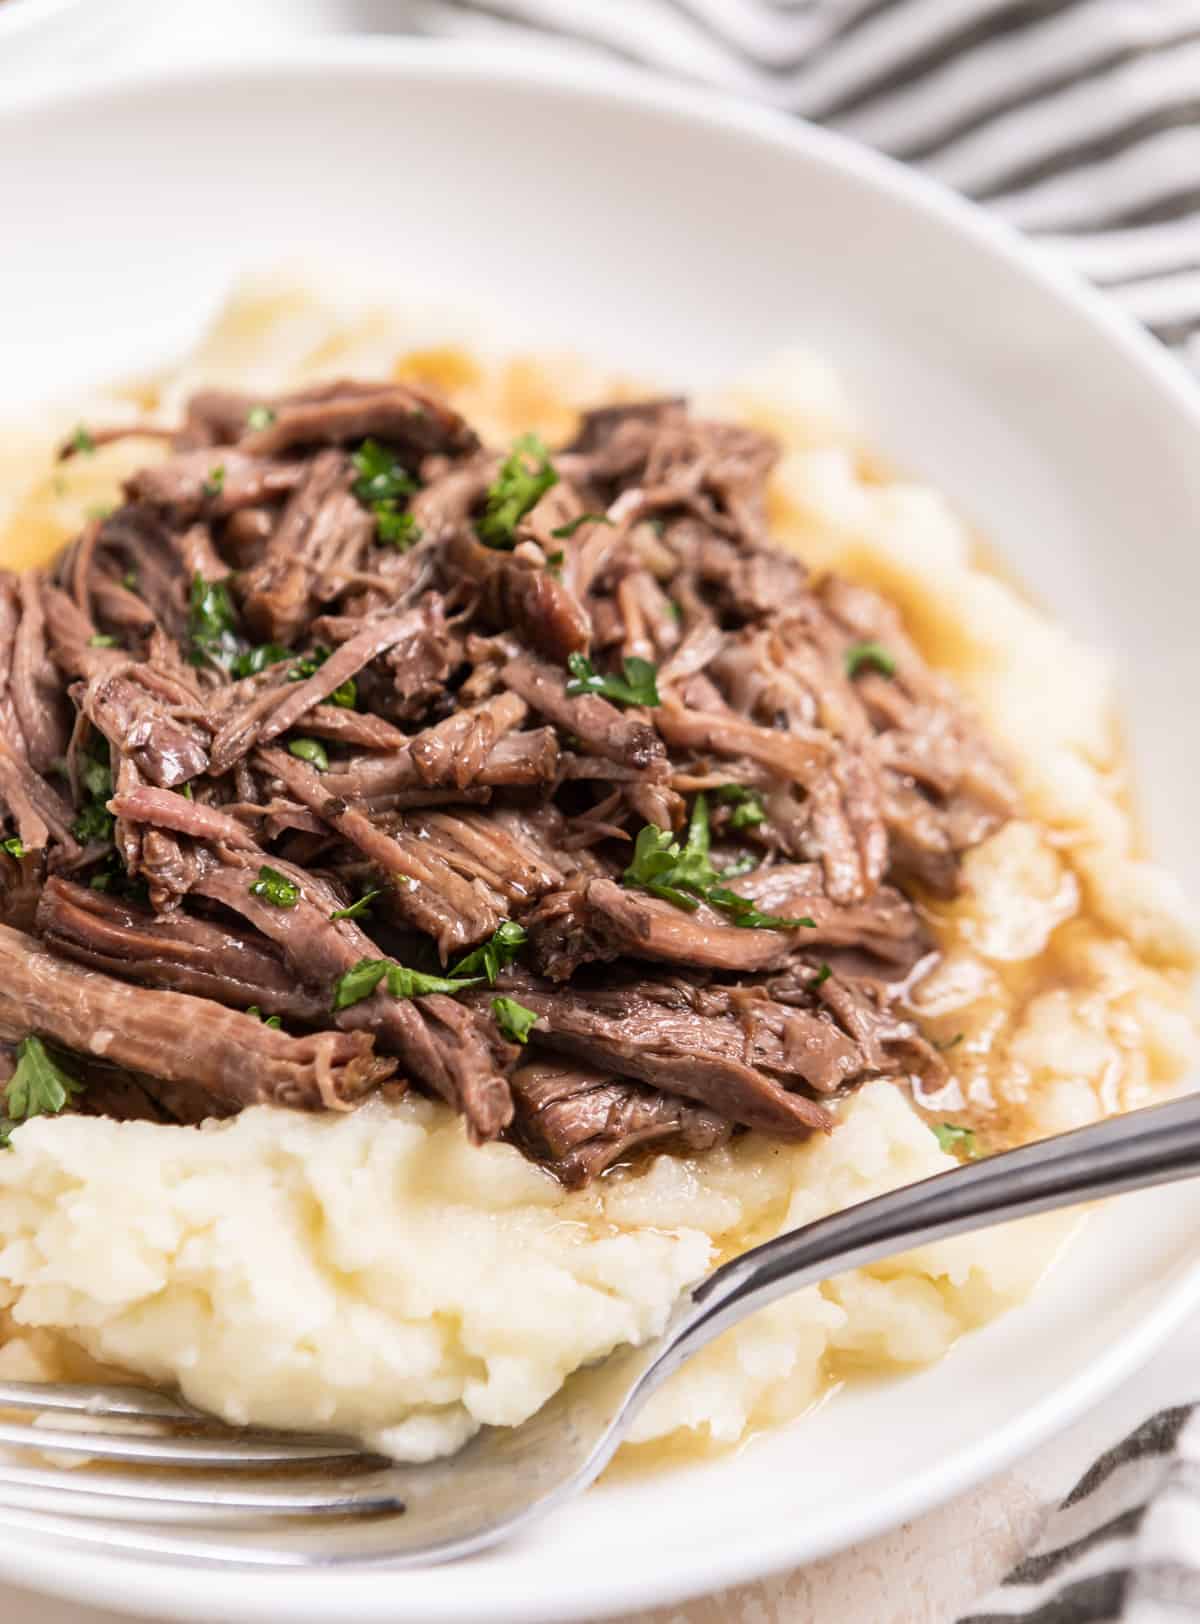 White plate with slow cooked shredded beef on mashed potatoes with chopped parsley.